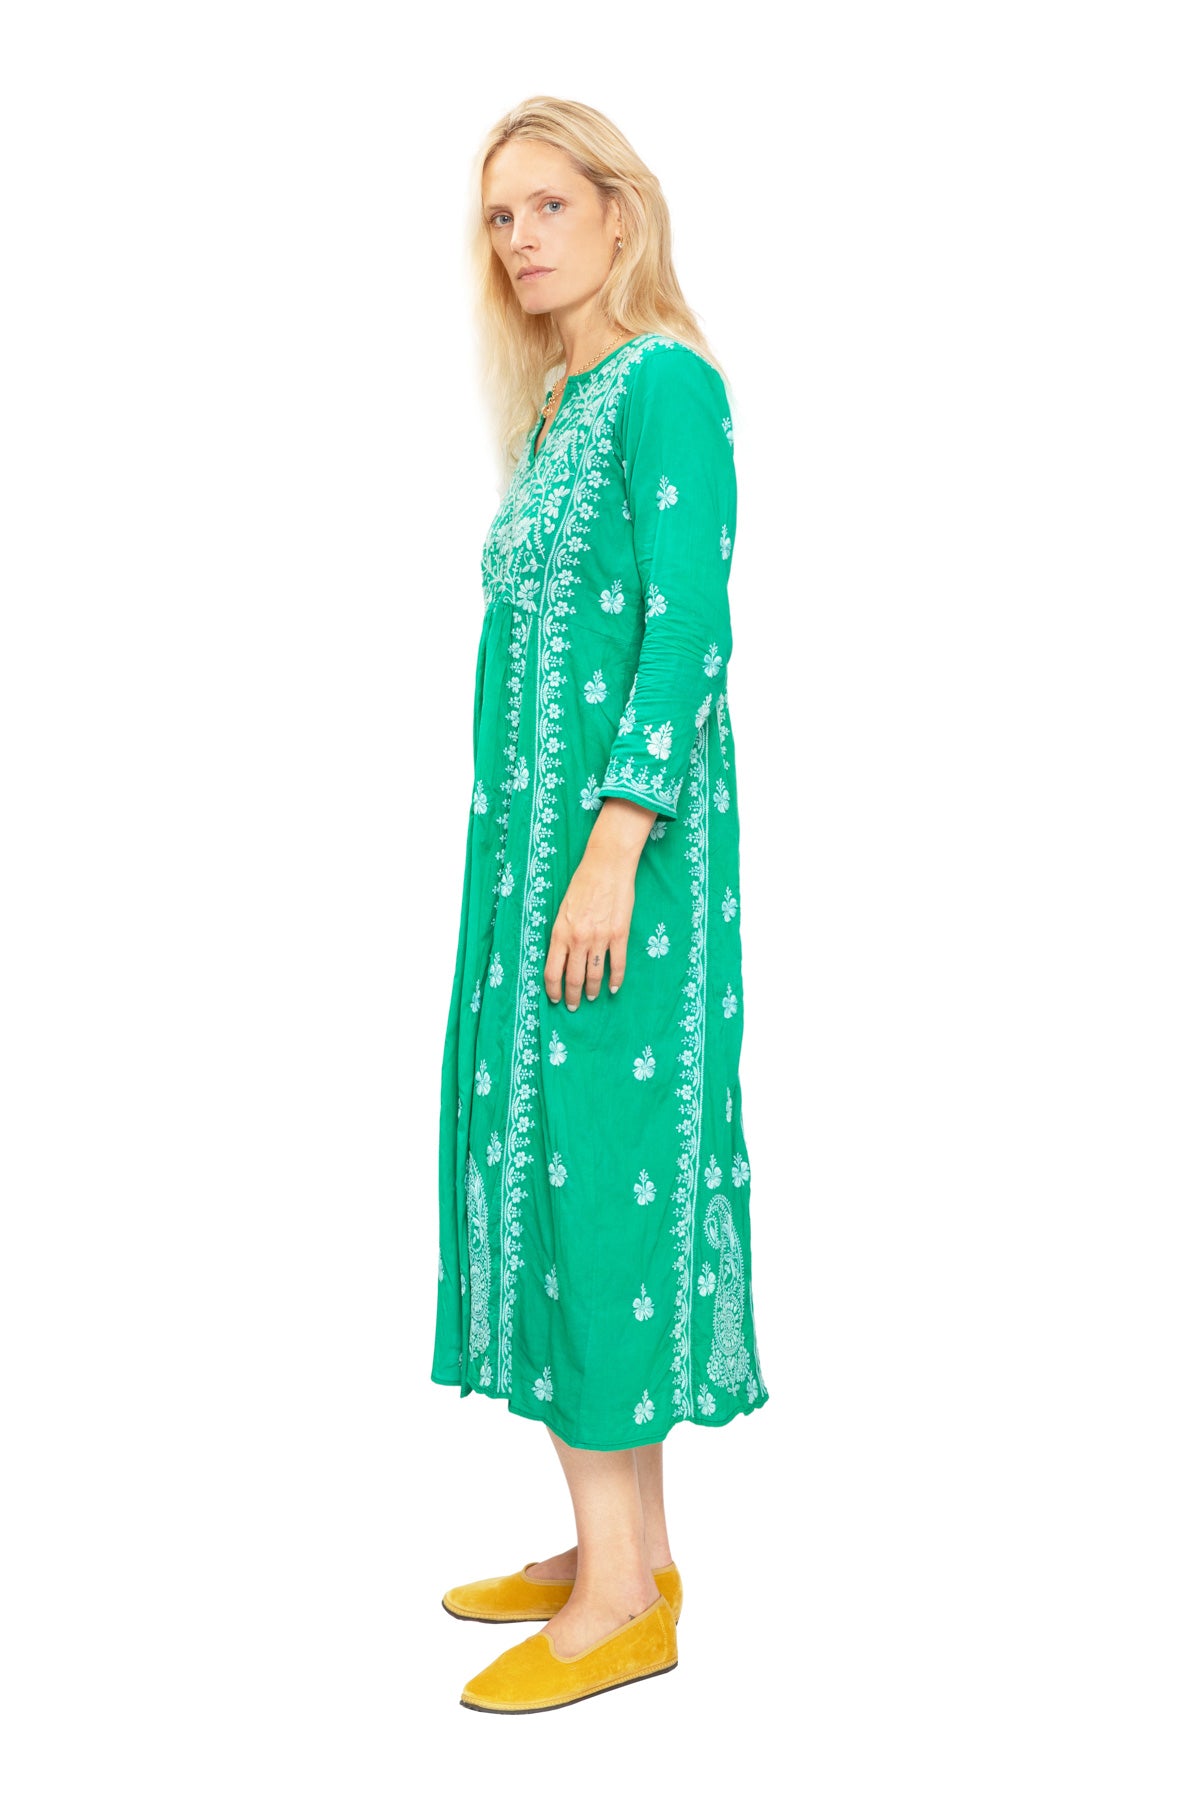 Cotton Embroidered Dress - Emerald Green